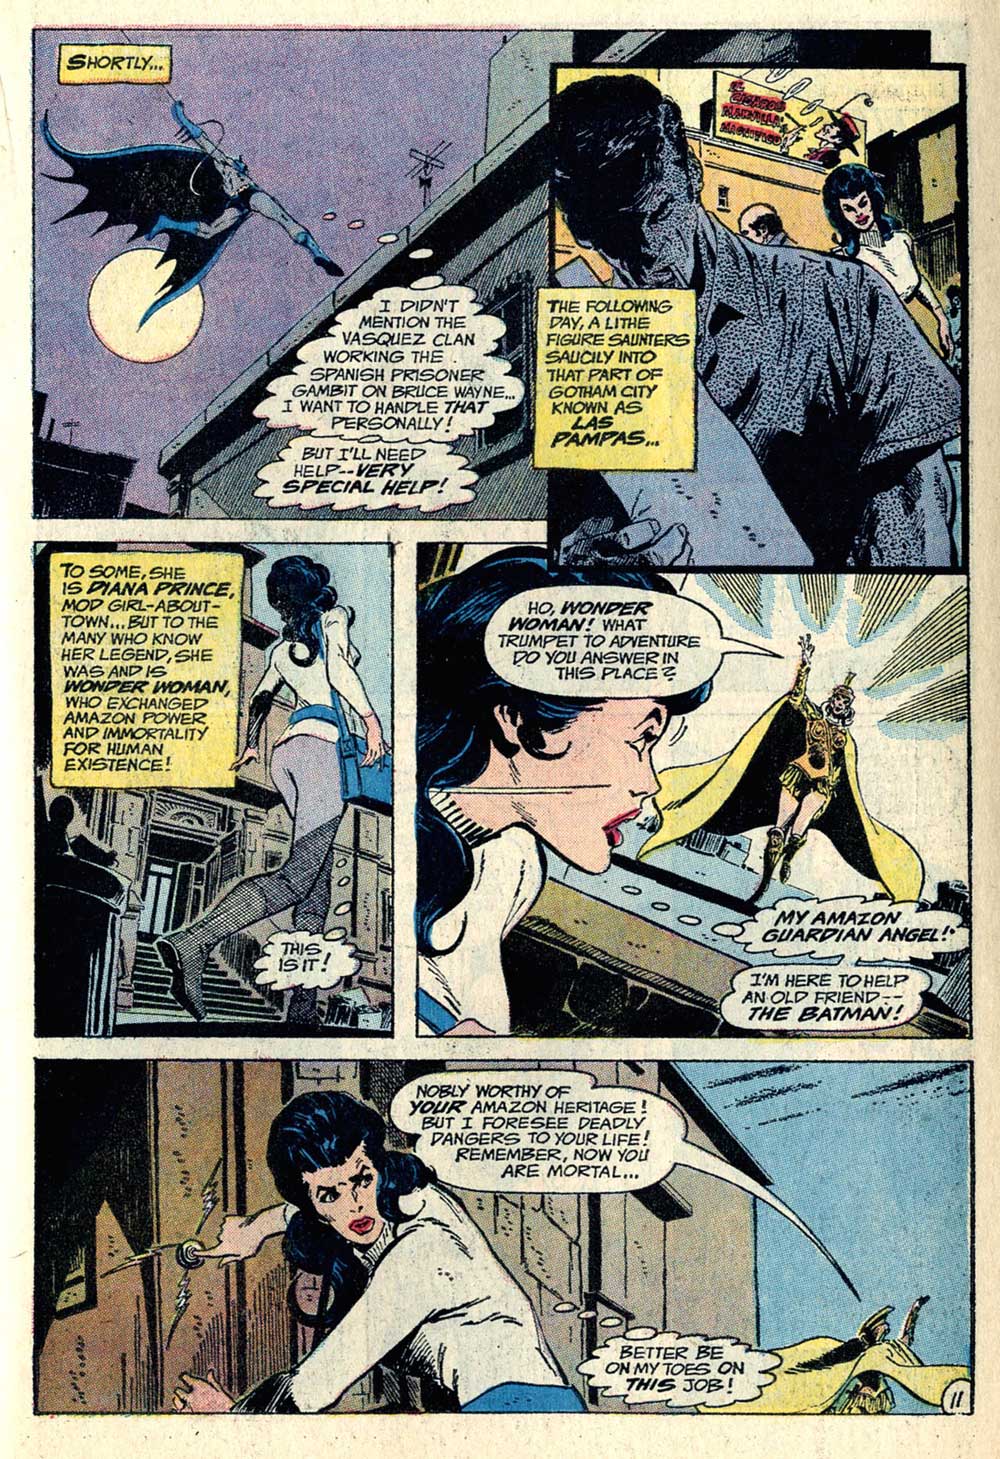 THE BRAVE AND THE BOLD #105 written by Bob Haney with art by Jim Aparo